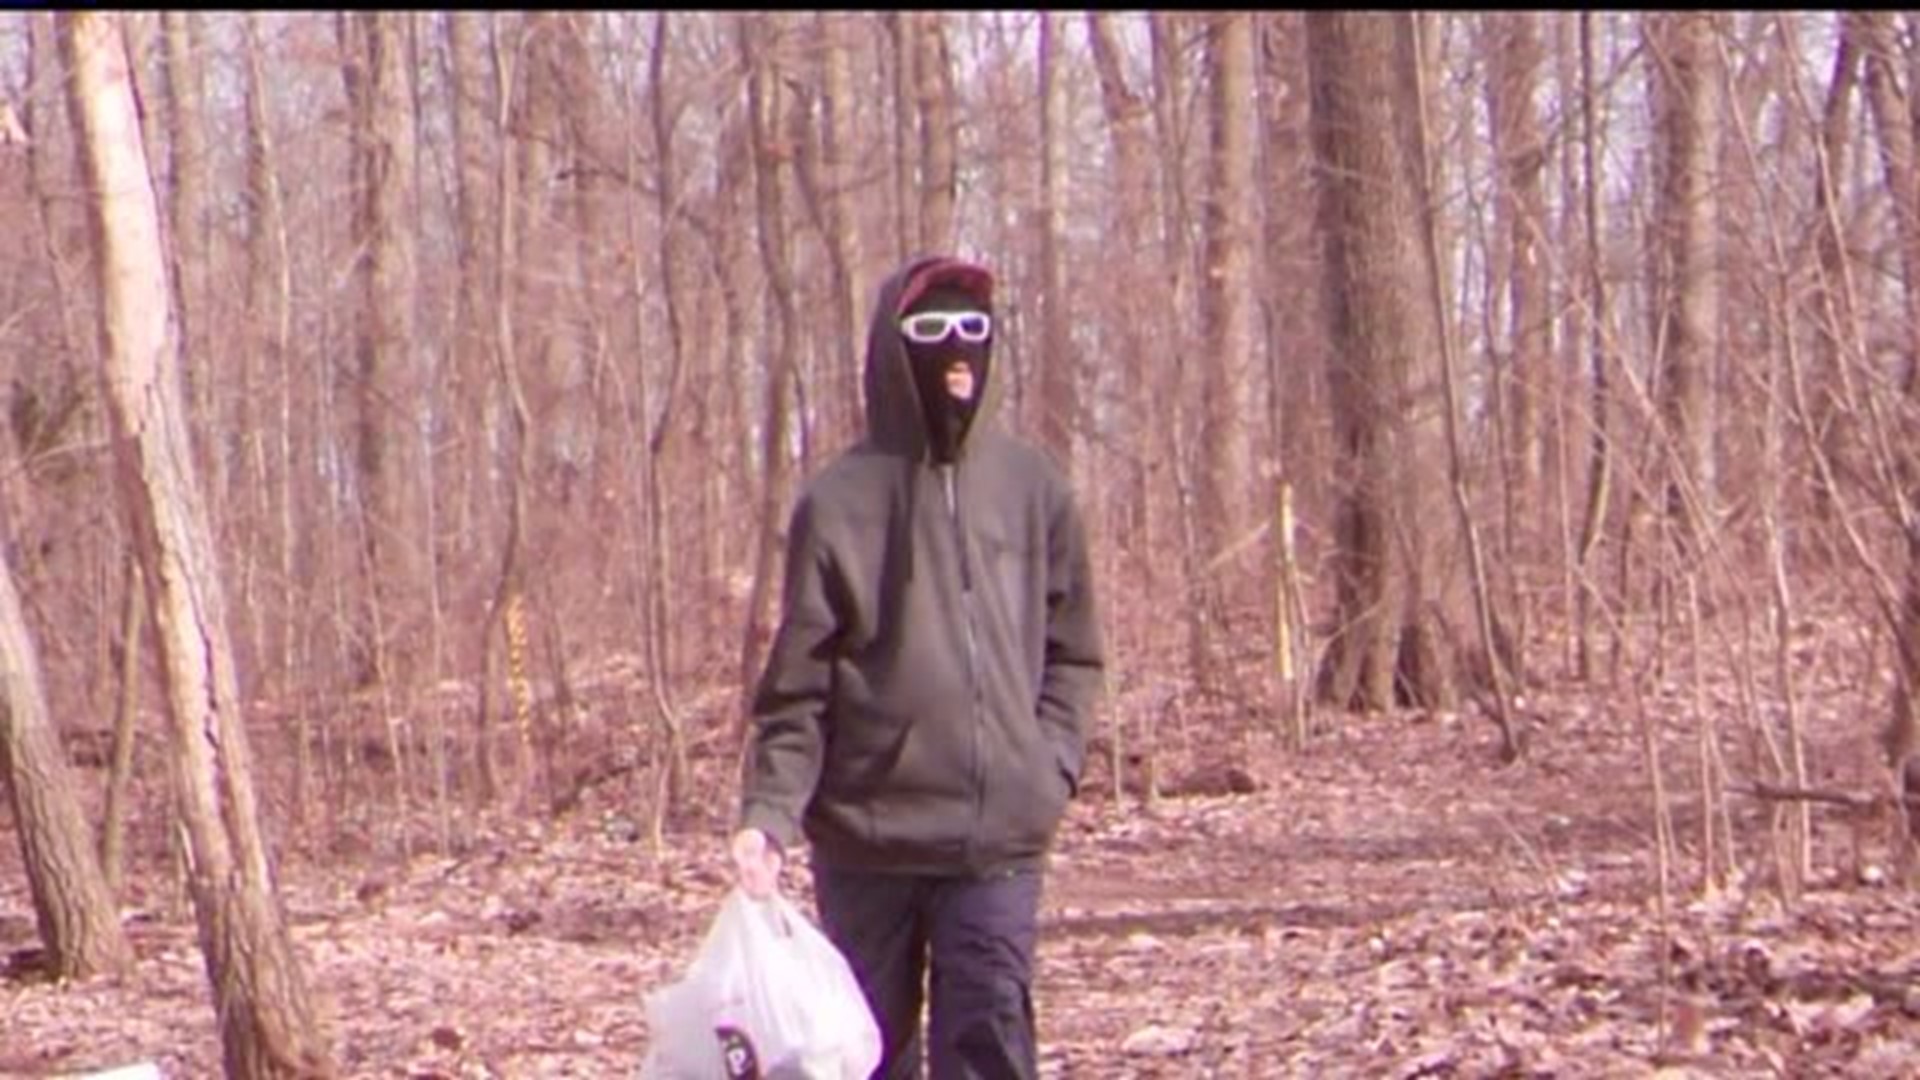 Trail cameras capture masked man and, minutes later, fire on York County homeowners` property